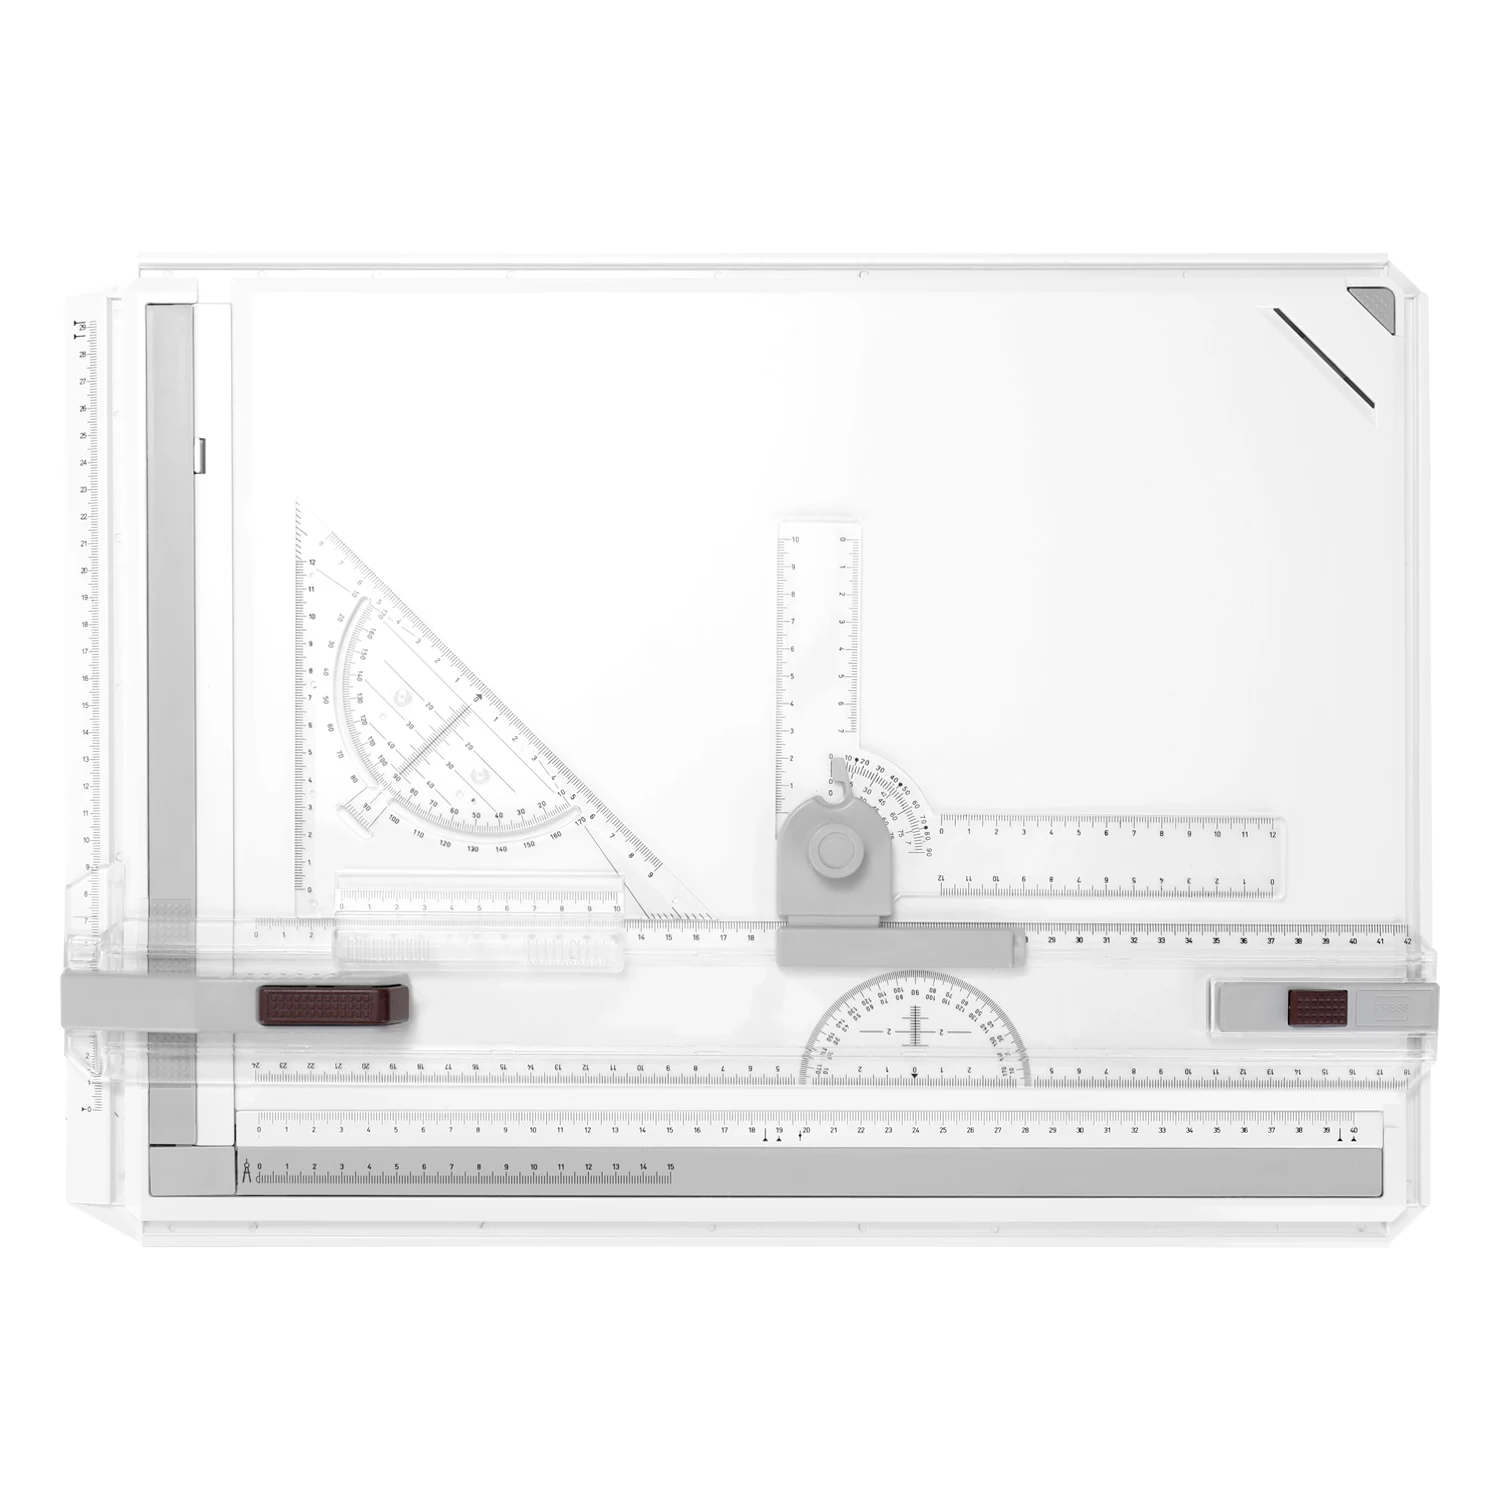 

A3 Picture Drawing Board Cartographic Platform with Smooth Guide Rails Precise Marks Ruler Functional "L" design Auxiliary Tool